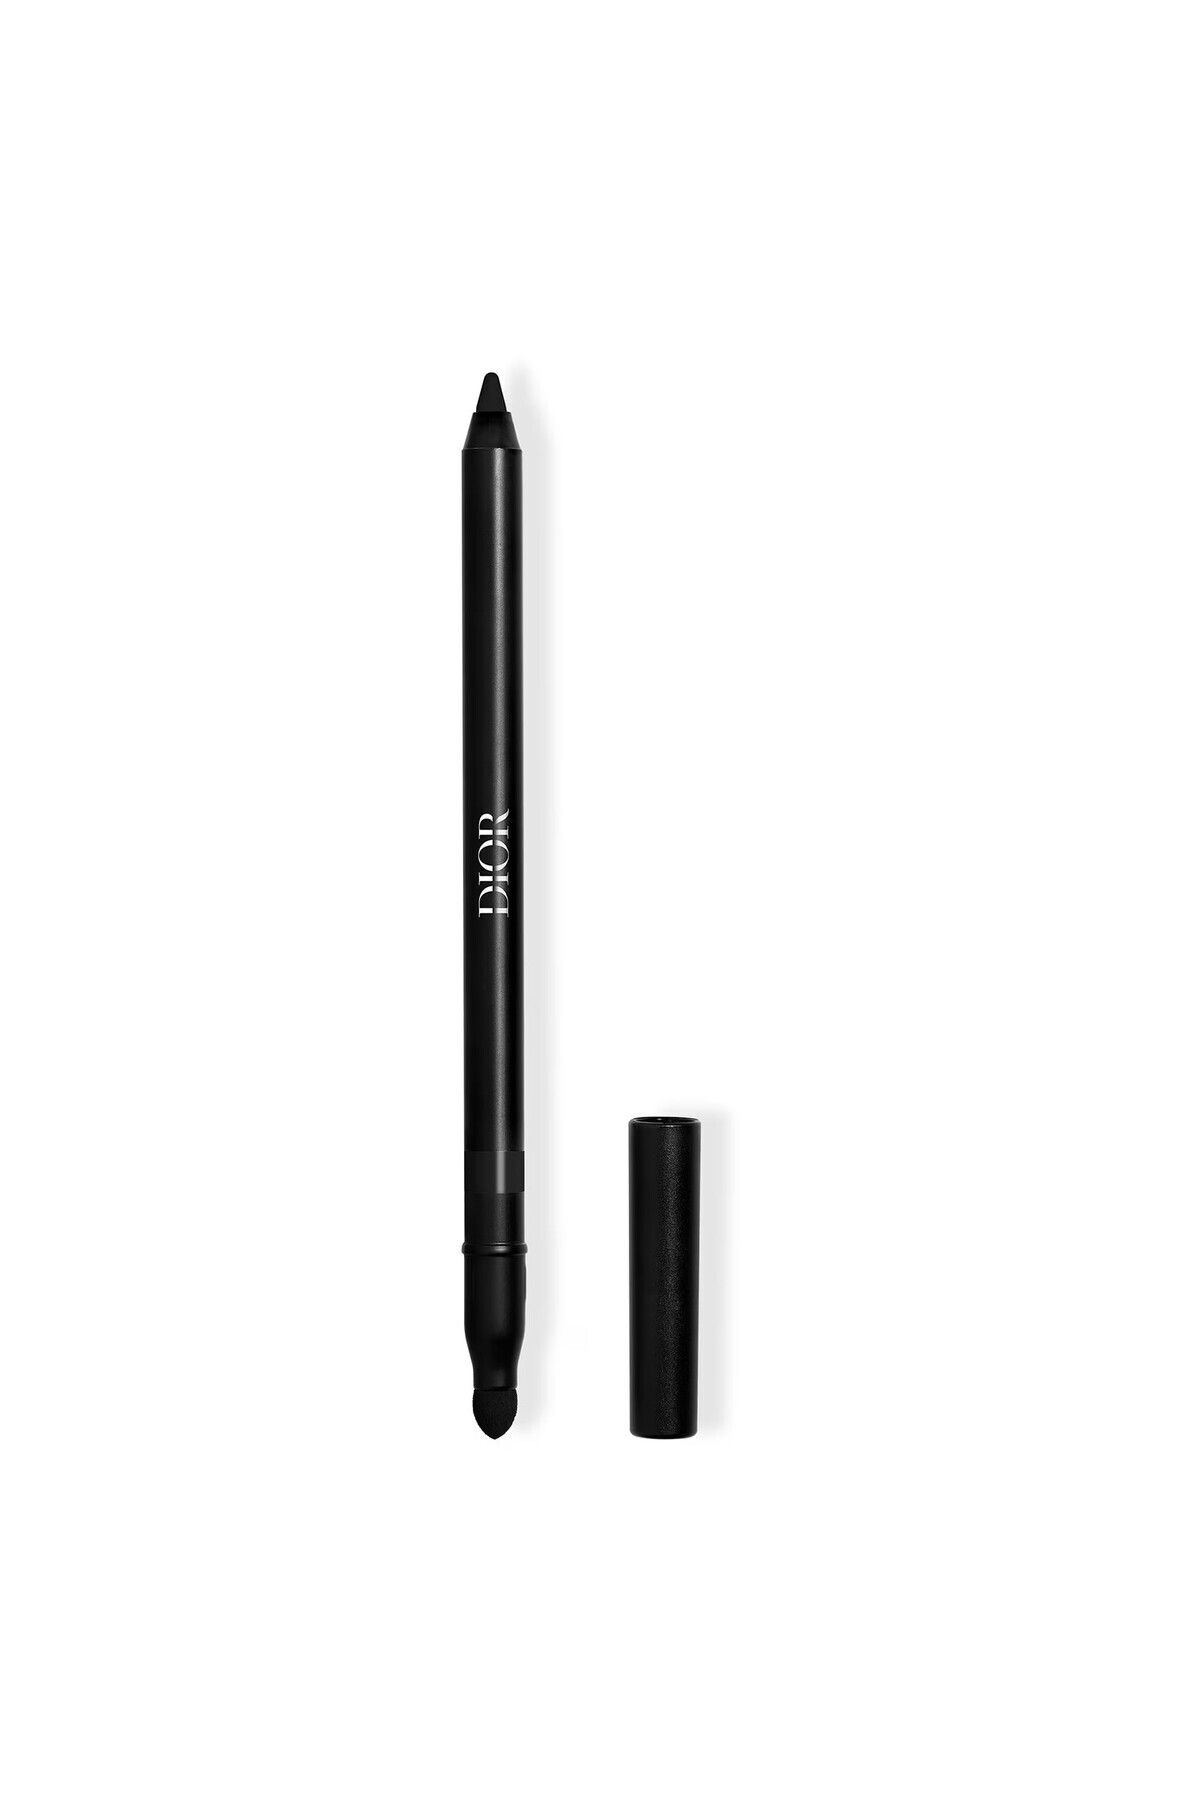 Dior SHOW KOHL - SMUDGE-PROOF, İNTENSE COLOR, WATERPROOF, CREAMY TEXTURE EYE PENCİL PSSN2372